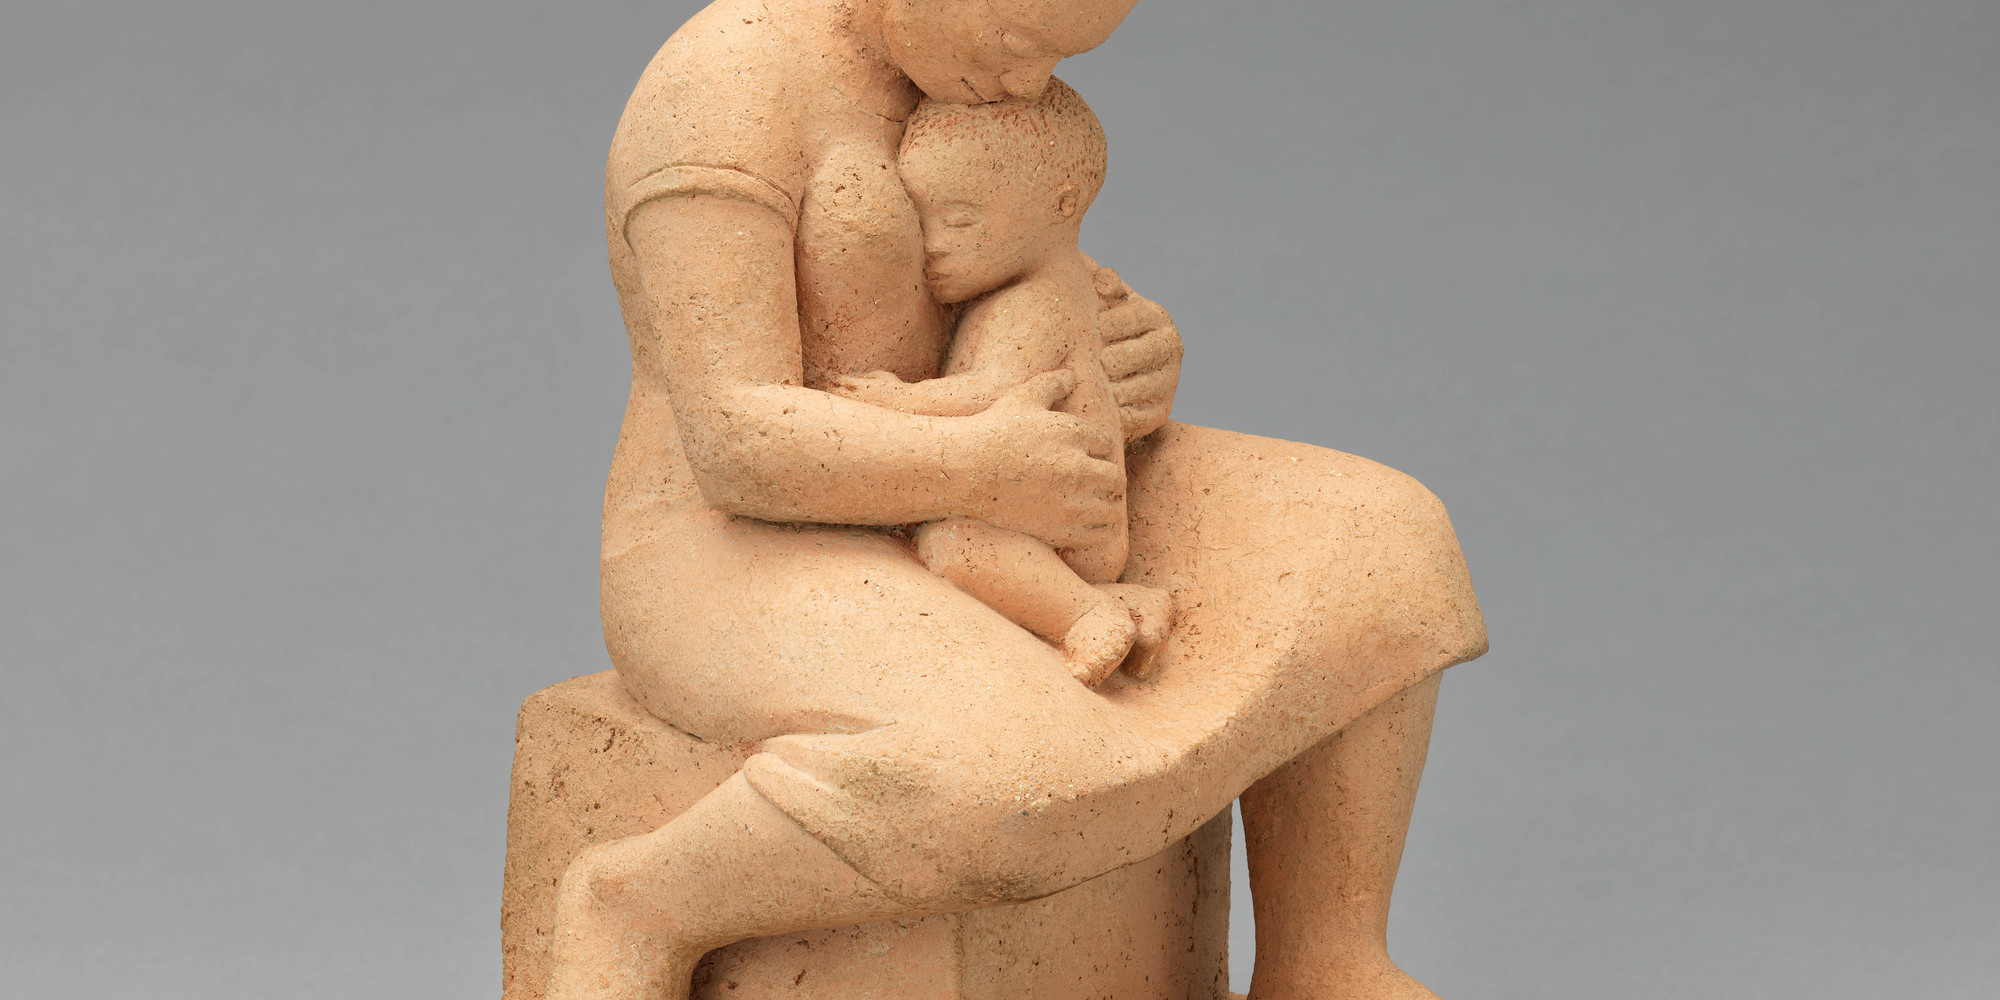 Elizabeth Catlett. Mother and Child. 1956. Terra cotta, 11 1/4 × 7 × 7&#34; (28.6 × 17.8 × 17.8 cm). The Museum of Modern Art, New York. Gift of The Friends of Education of The Museum of Modern Art, The Modern Women’s Fund, and Dr. Alfred Gold (by exchange)